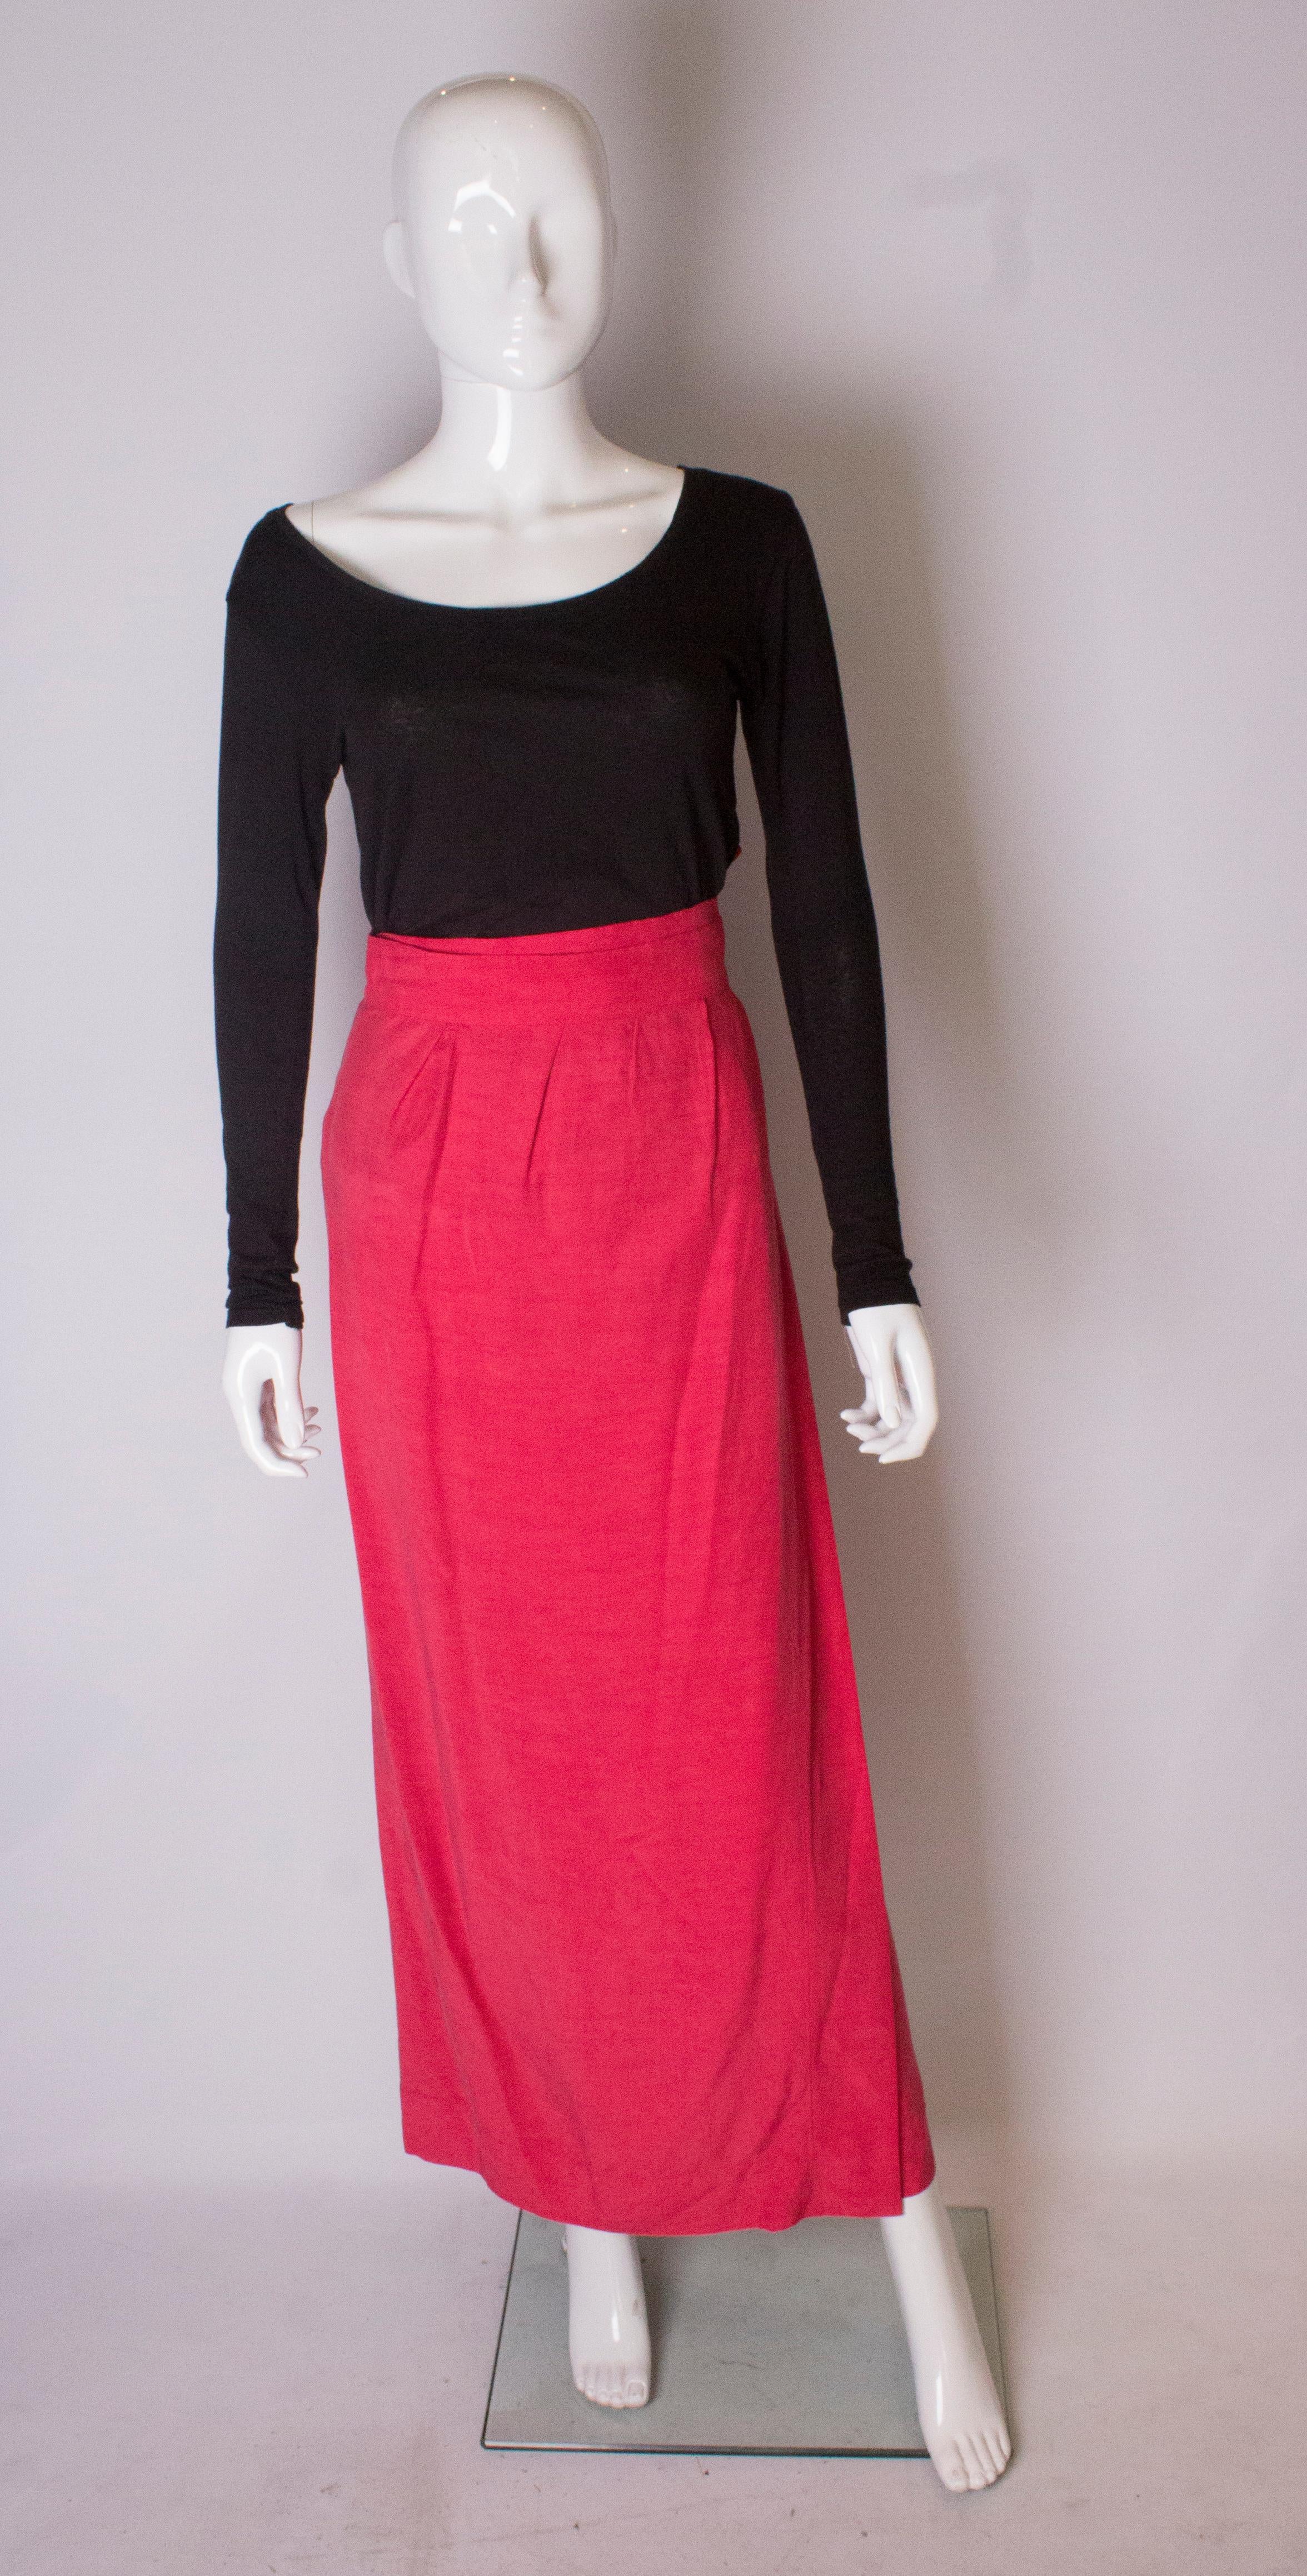 A pretty skirt by Yves Saint Laurent Rive Gauche. The skirt is a wrap over style with ties, and slight gathering at the waist.